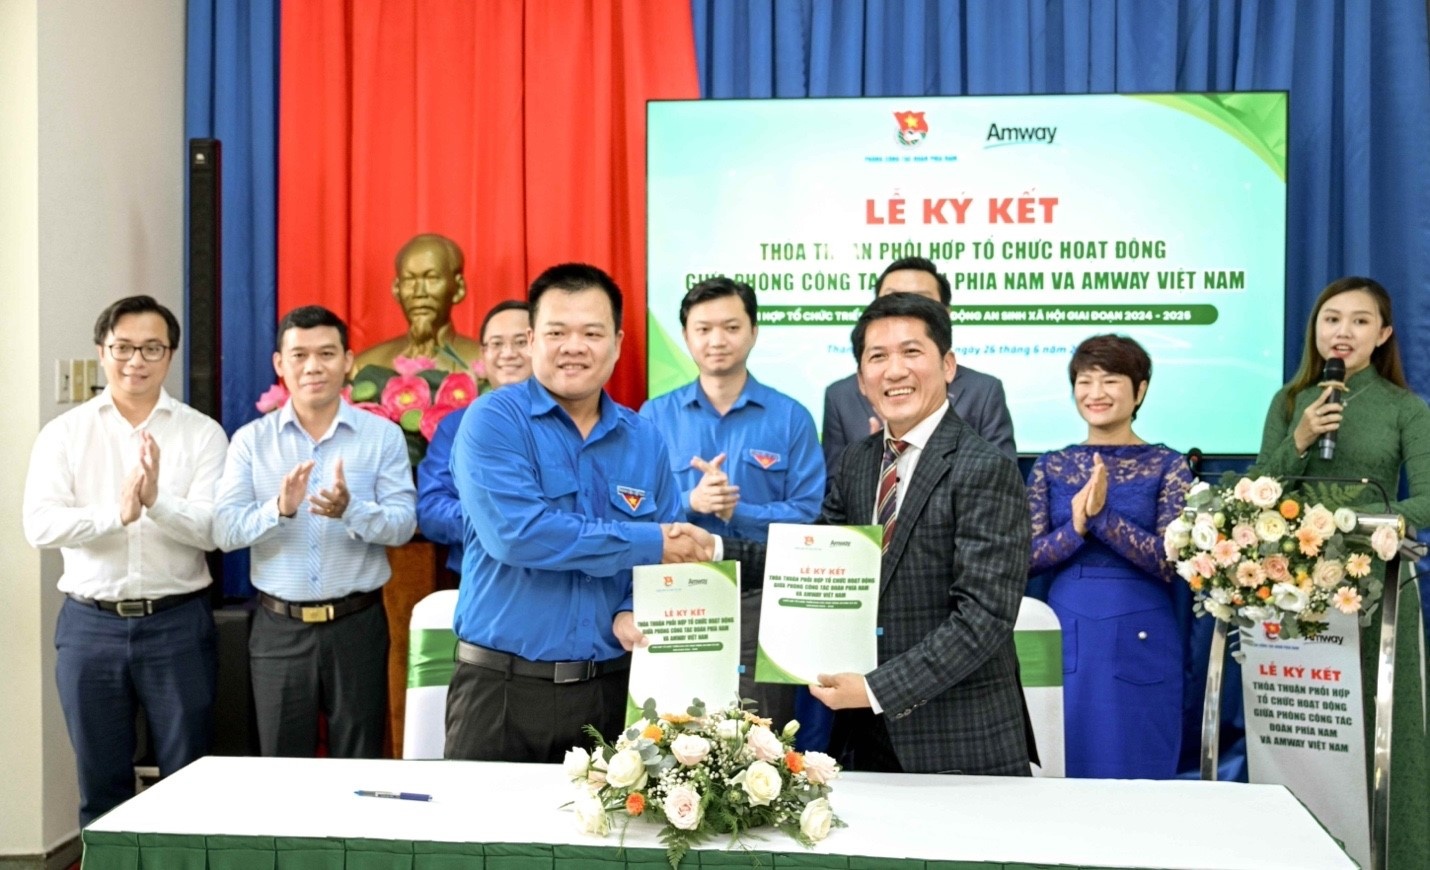 Amway Vietnam and Ho Chi Minh Communist Youth Union join hands in community activities